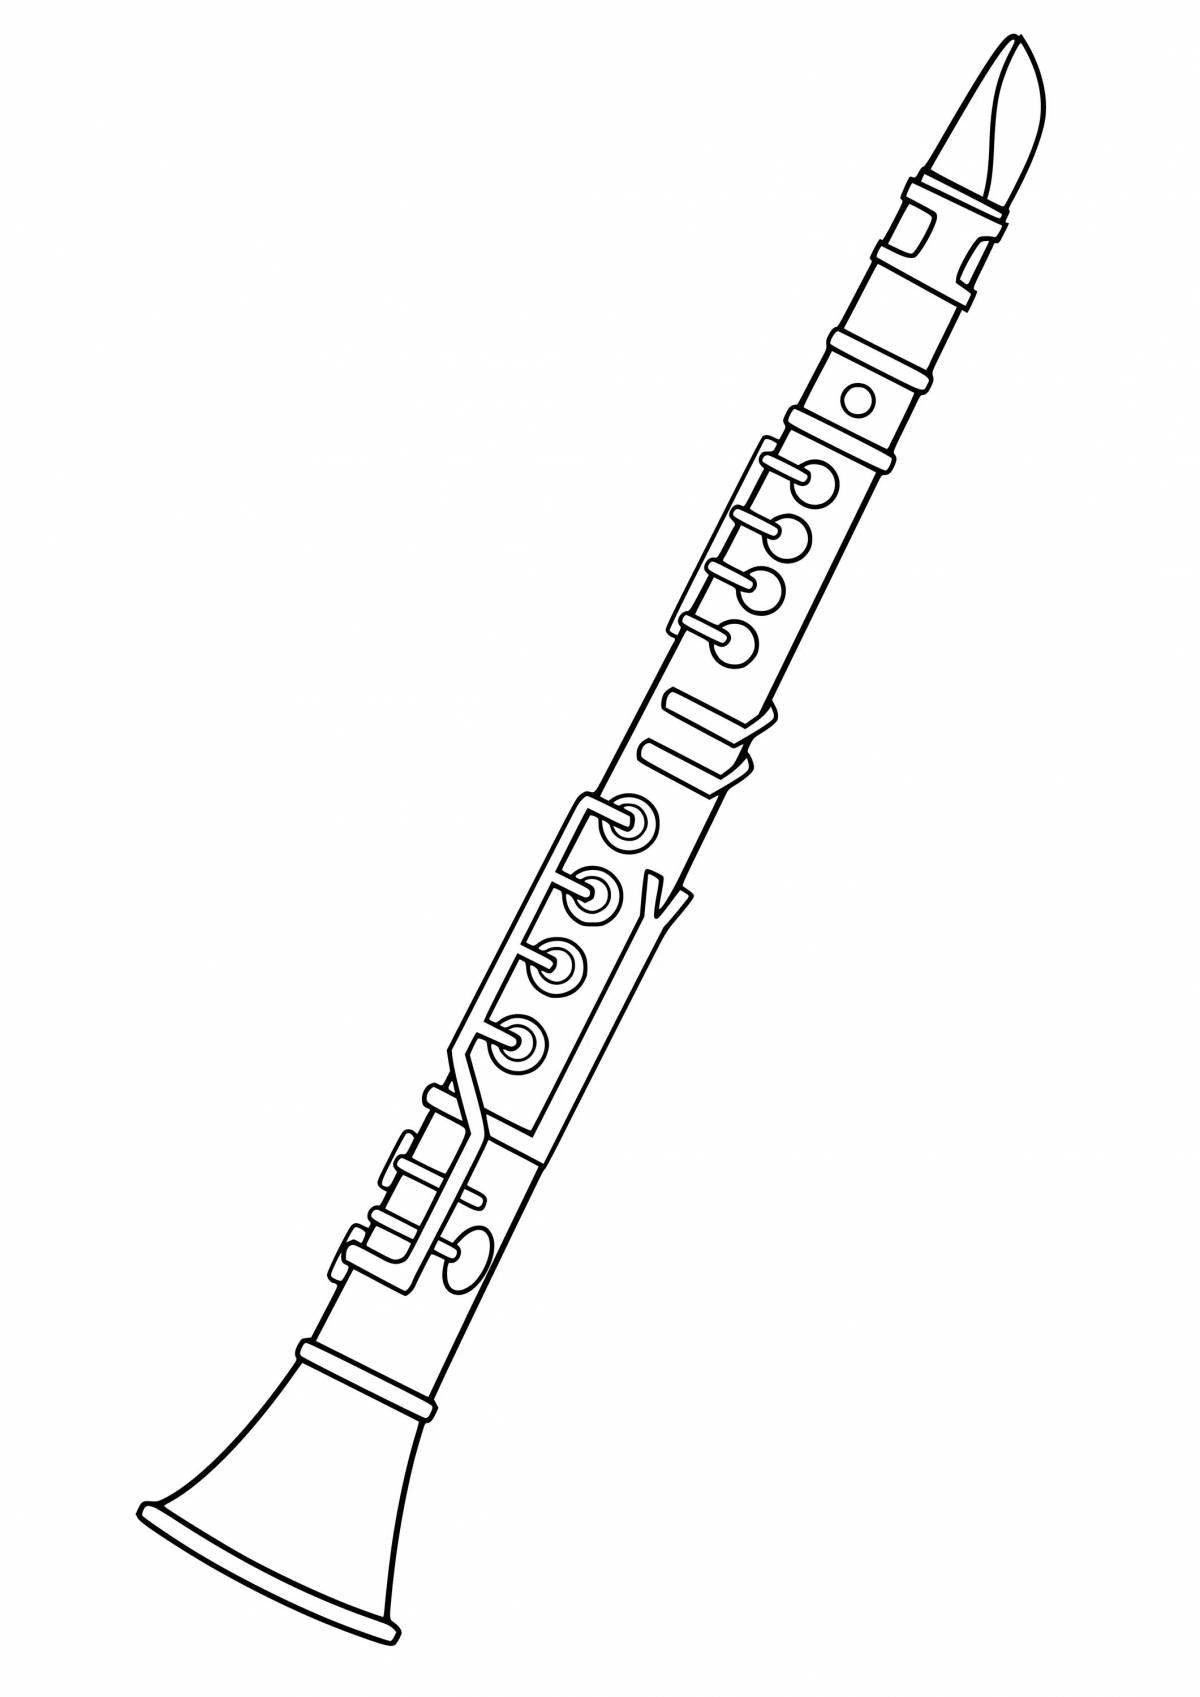 Great flute coloring page for kids